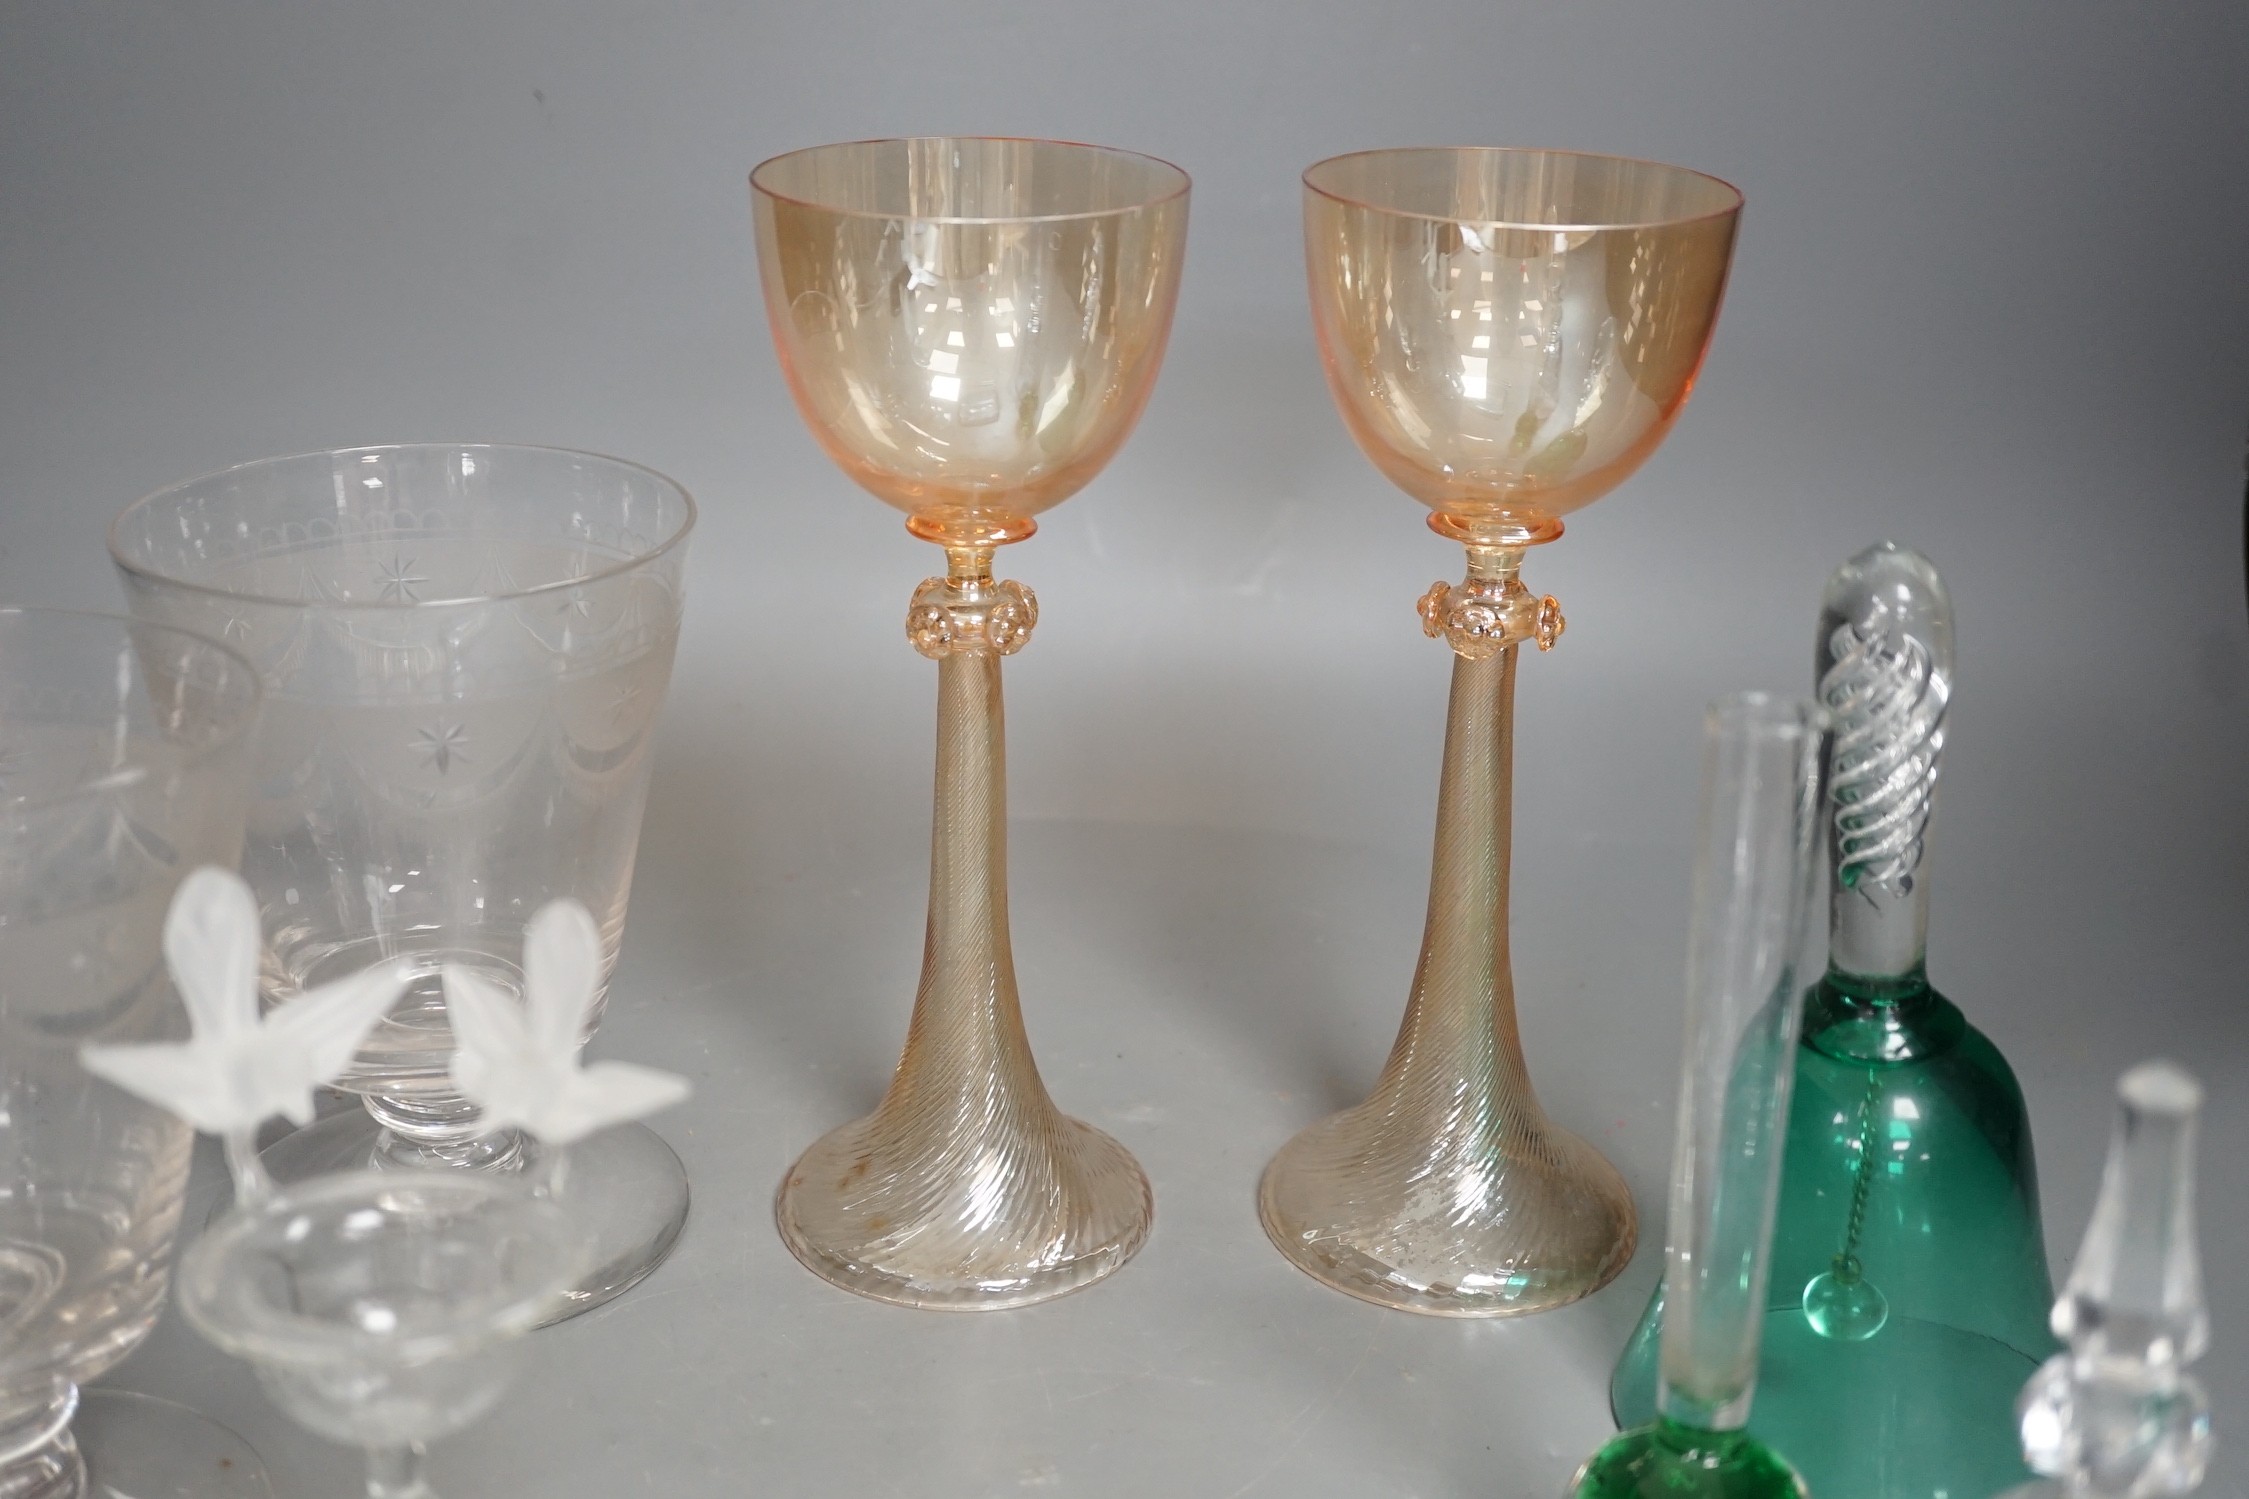 Two Venetian lustre glass goblets, a pair of rummers and sundry glassware, goblets 20cm high